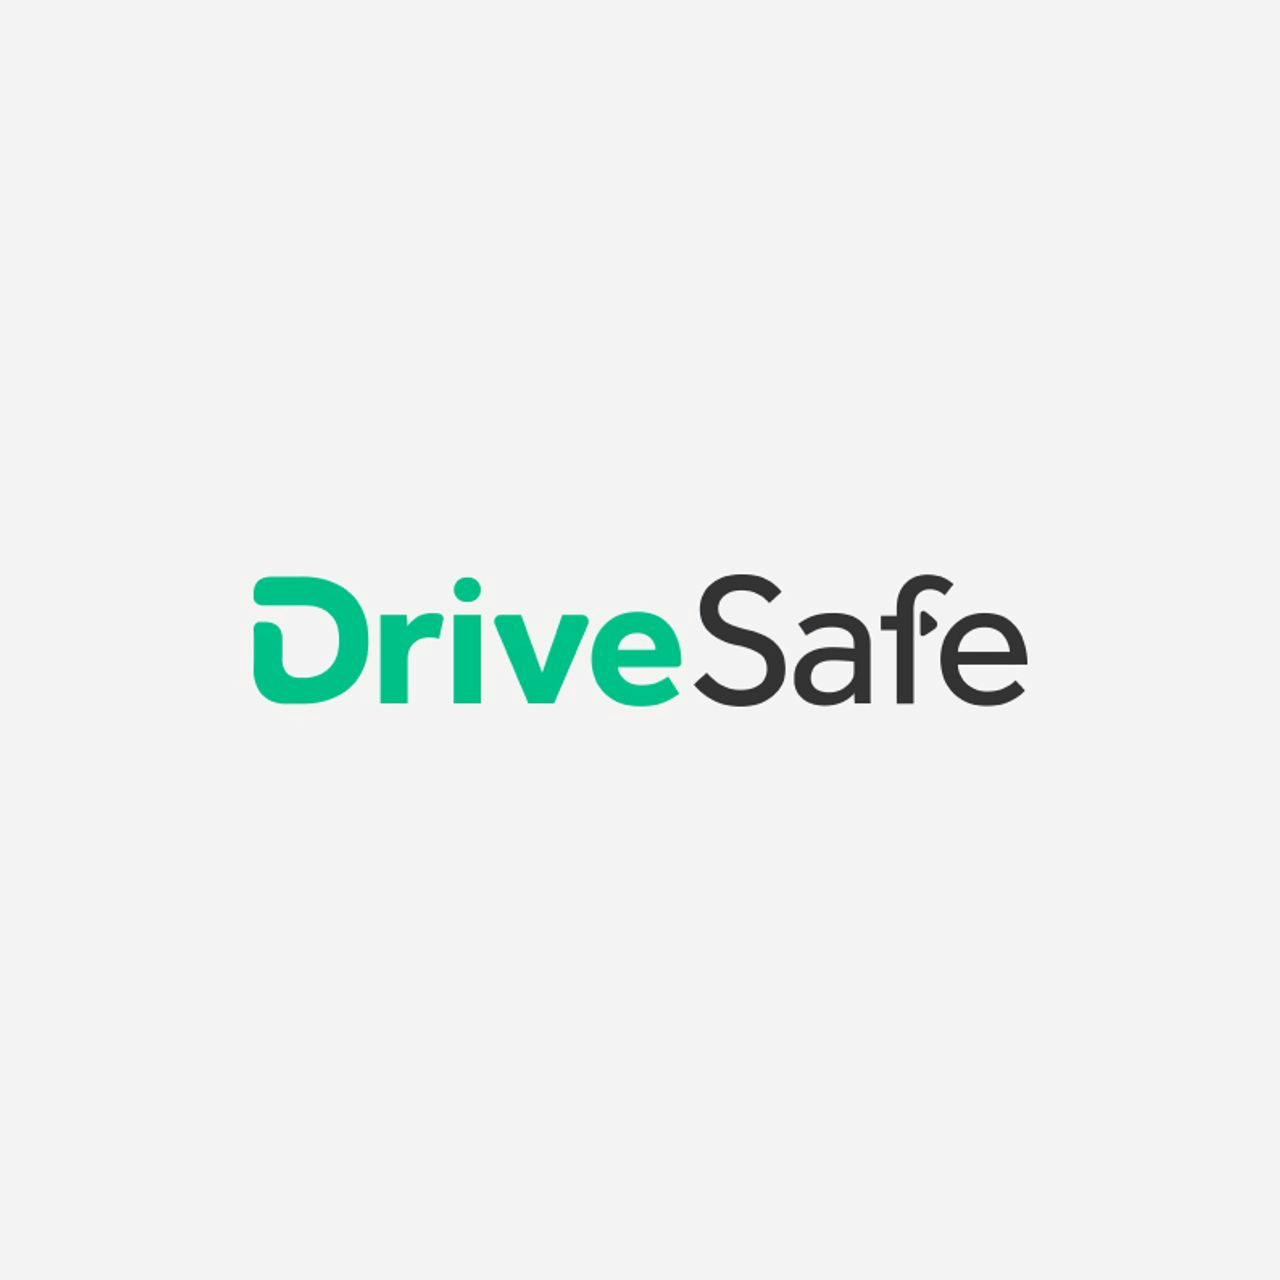 Logo with the words 'DriveSafe' in black and teal, emphasising safety in a modern, bold font.